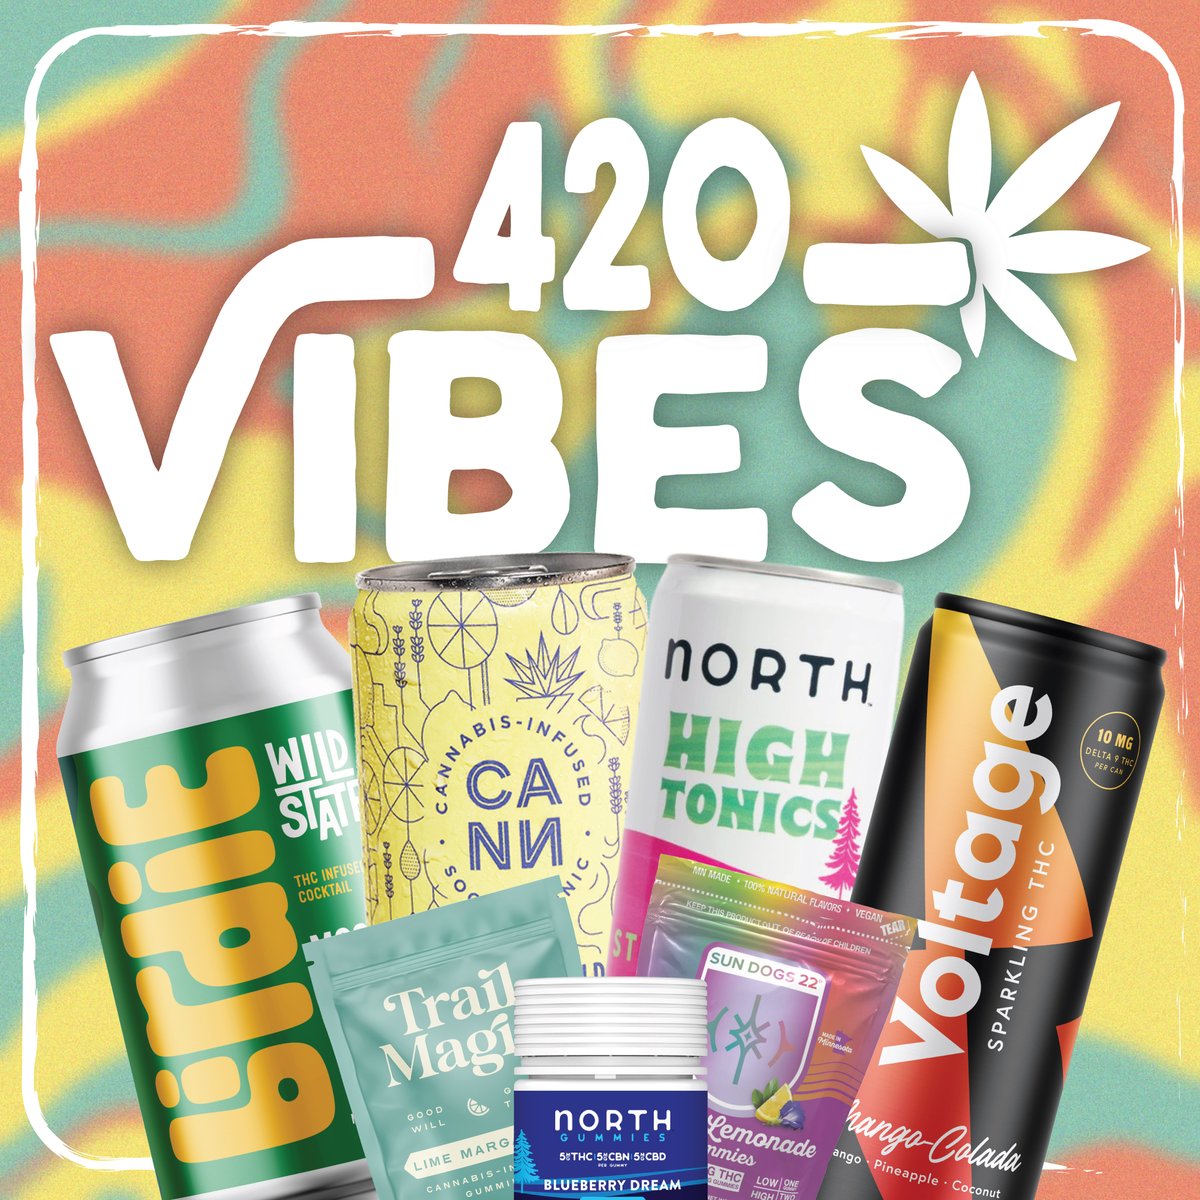 We're loving the buzz today. We hope you're enjoying all the sparkling waters, sodas, gummies, and whatever other indulgences you're into, friends. ✌️